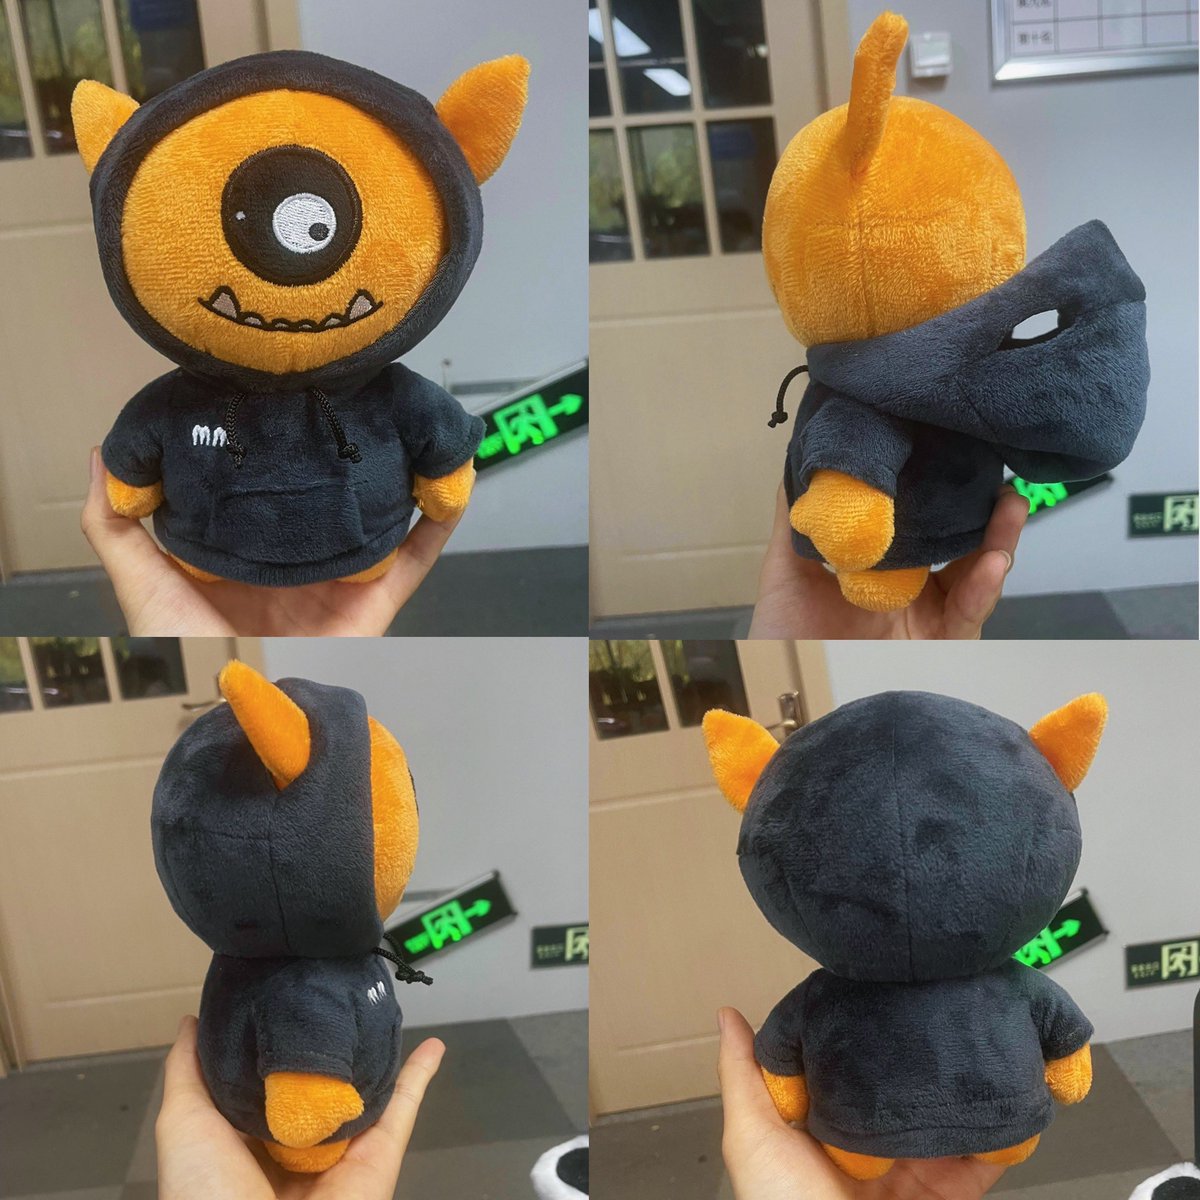 Ok, but how cute is this plush prototype? 👁❤️ #indiegame #gamedev #plushie #gamemerch #characterdesign #gamer